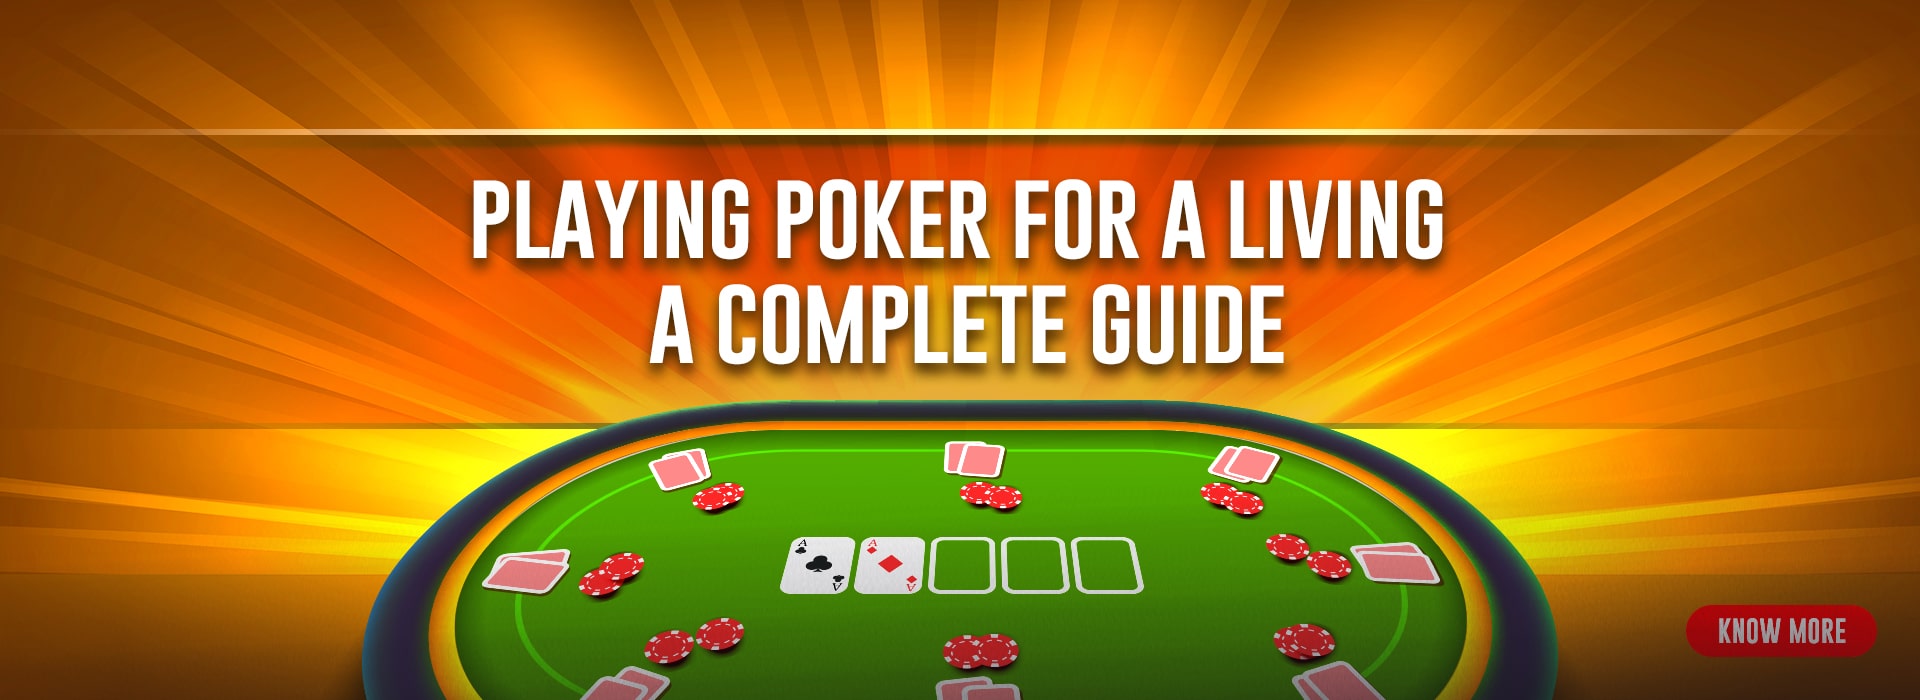 Playing Poker for a Living